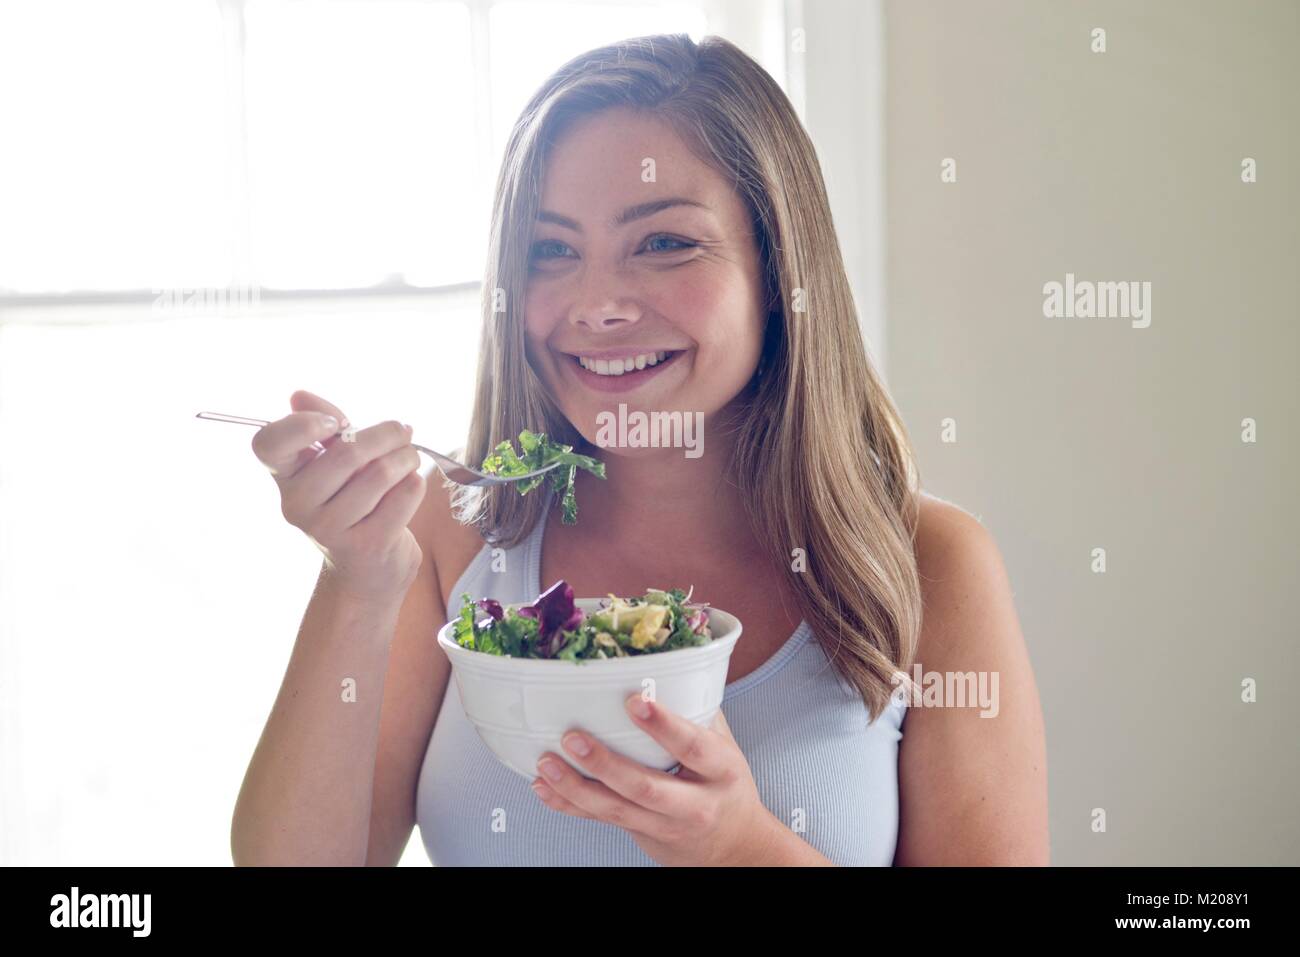 Portrait of young woman eating salad. Banque D'Images